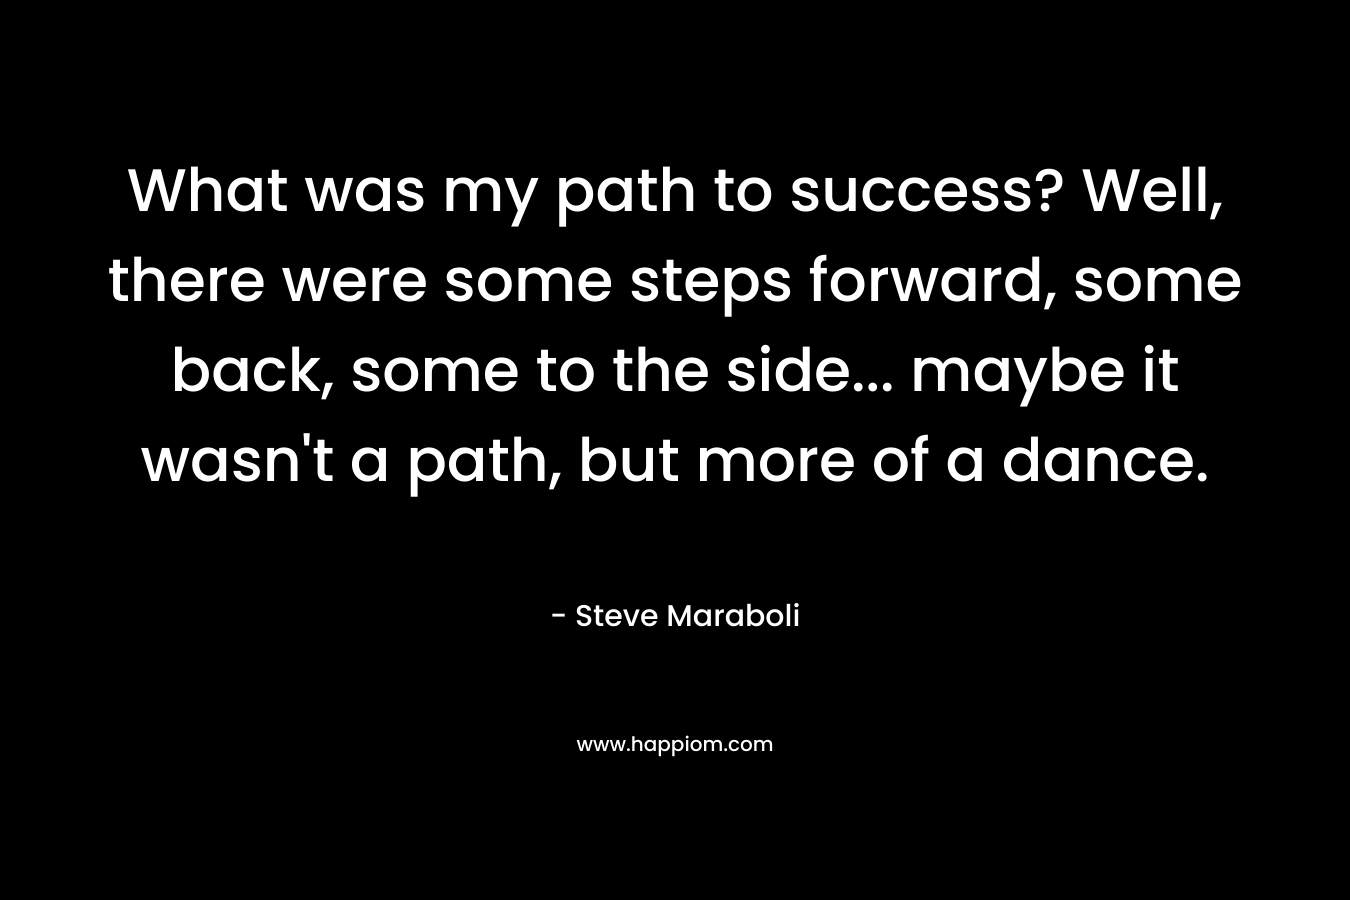 What was my path to success? Well, there were some steps forward, some back, some to the side... maybe it wasn't a path, but more of a dance.